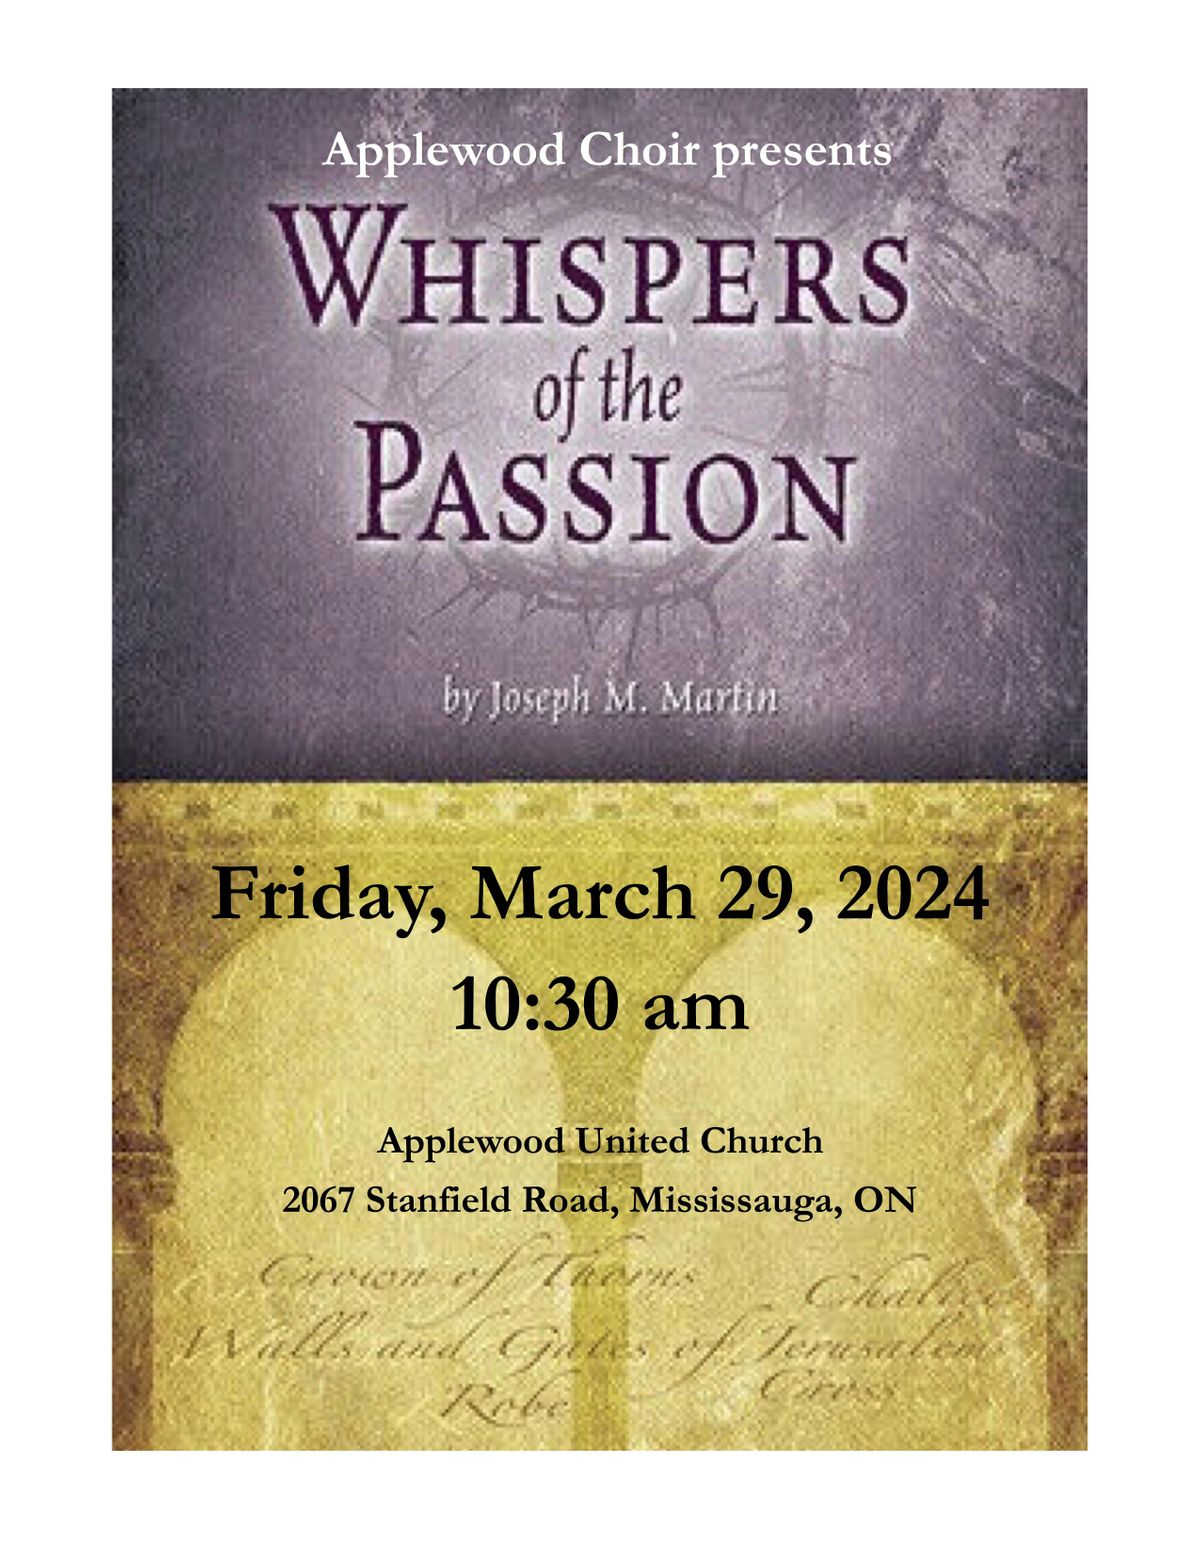 Whispers of the Passion - Good Friday Musical